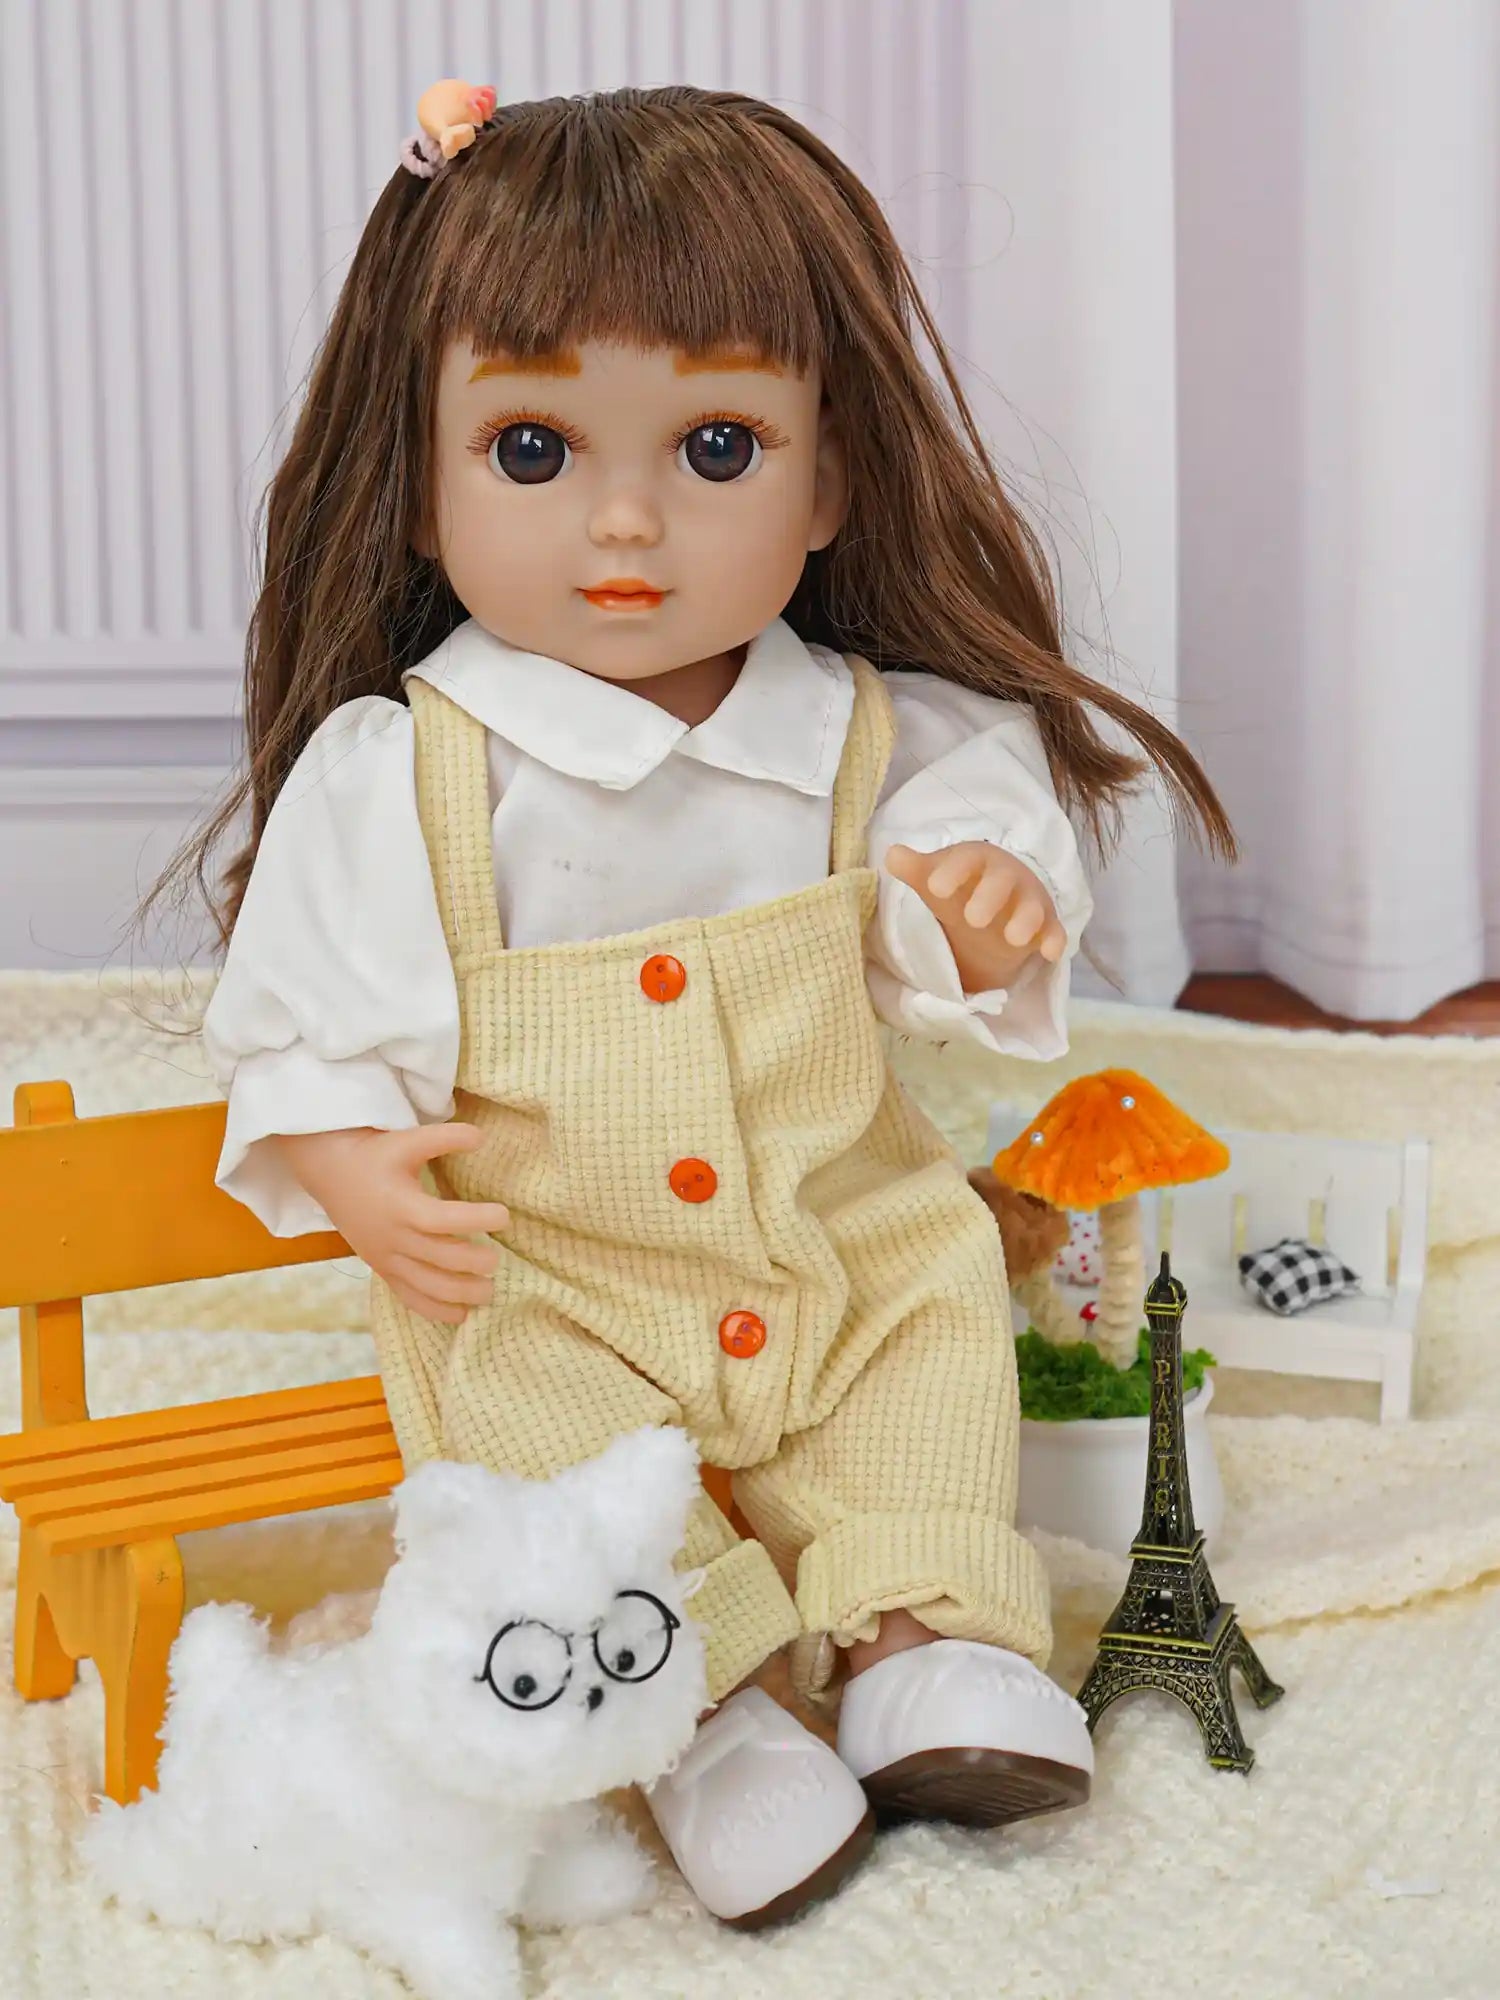 Brown-haired doll, white blouse, yellow overalls, with a stuffed dog and Eiffel Tower.